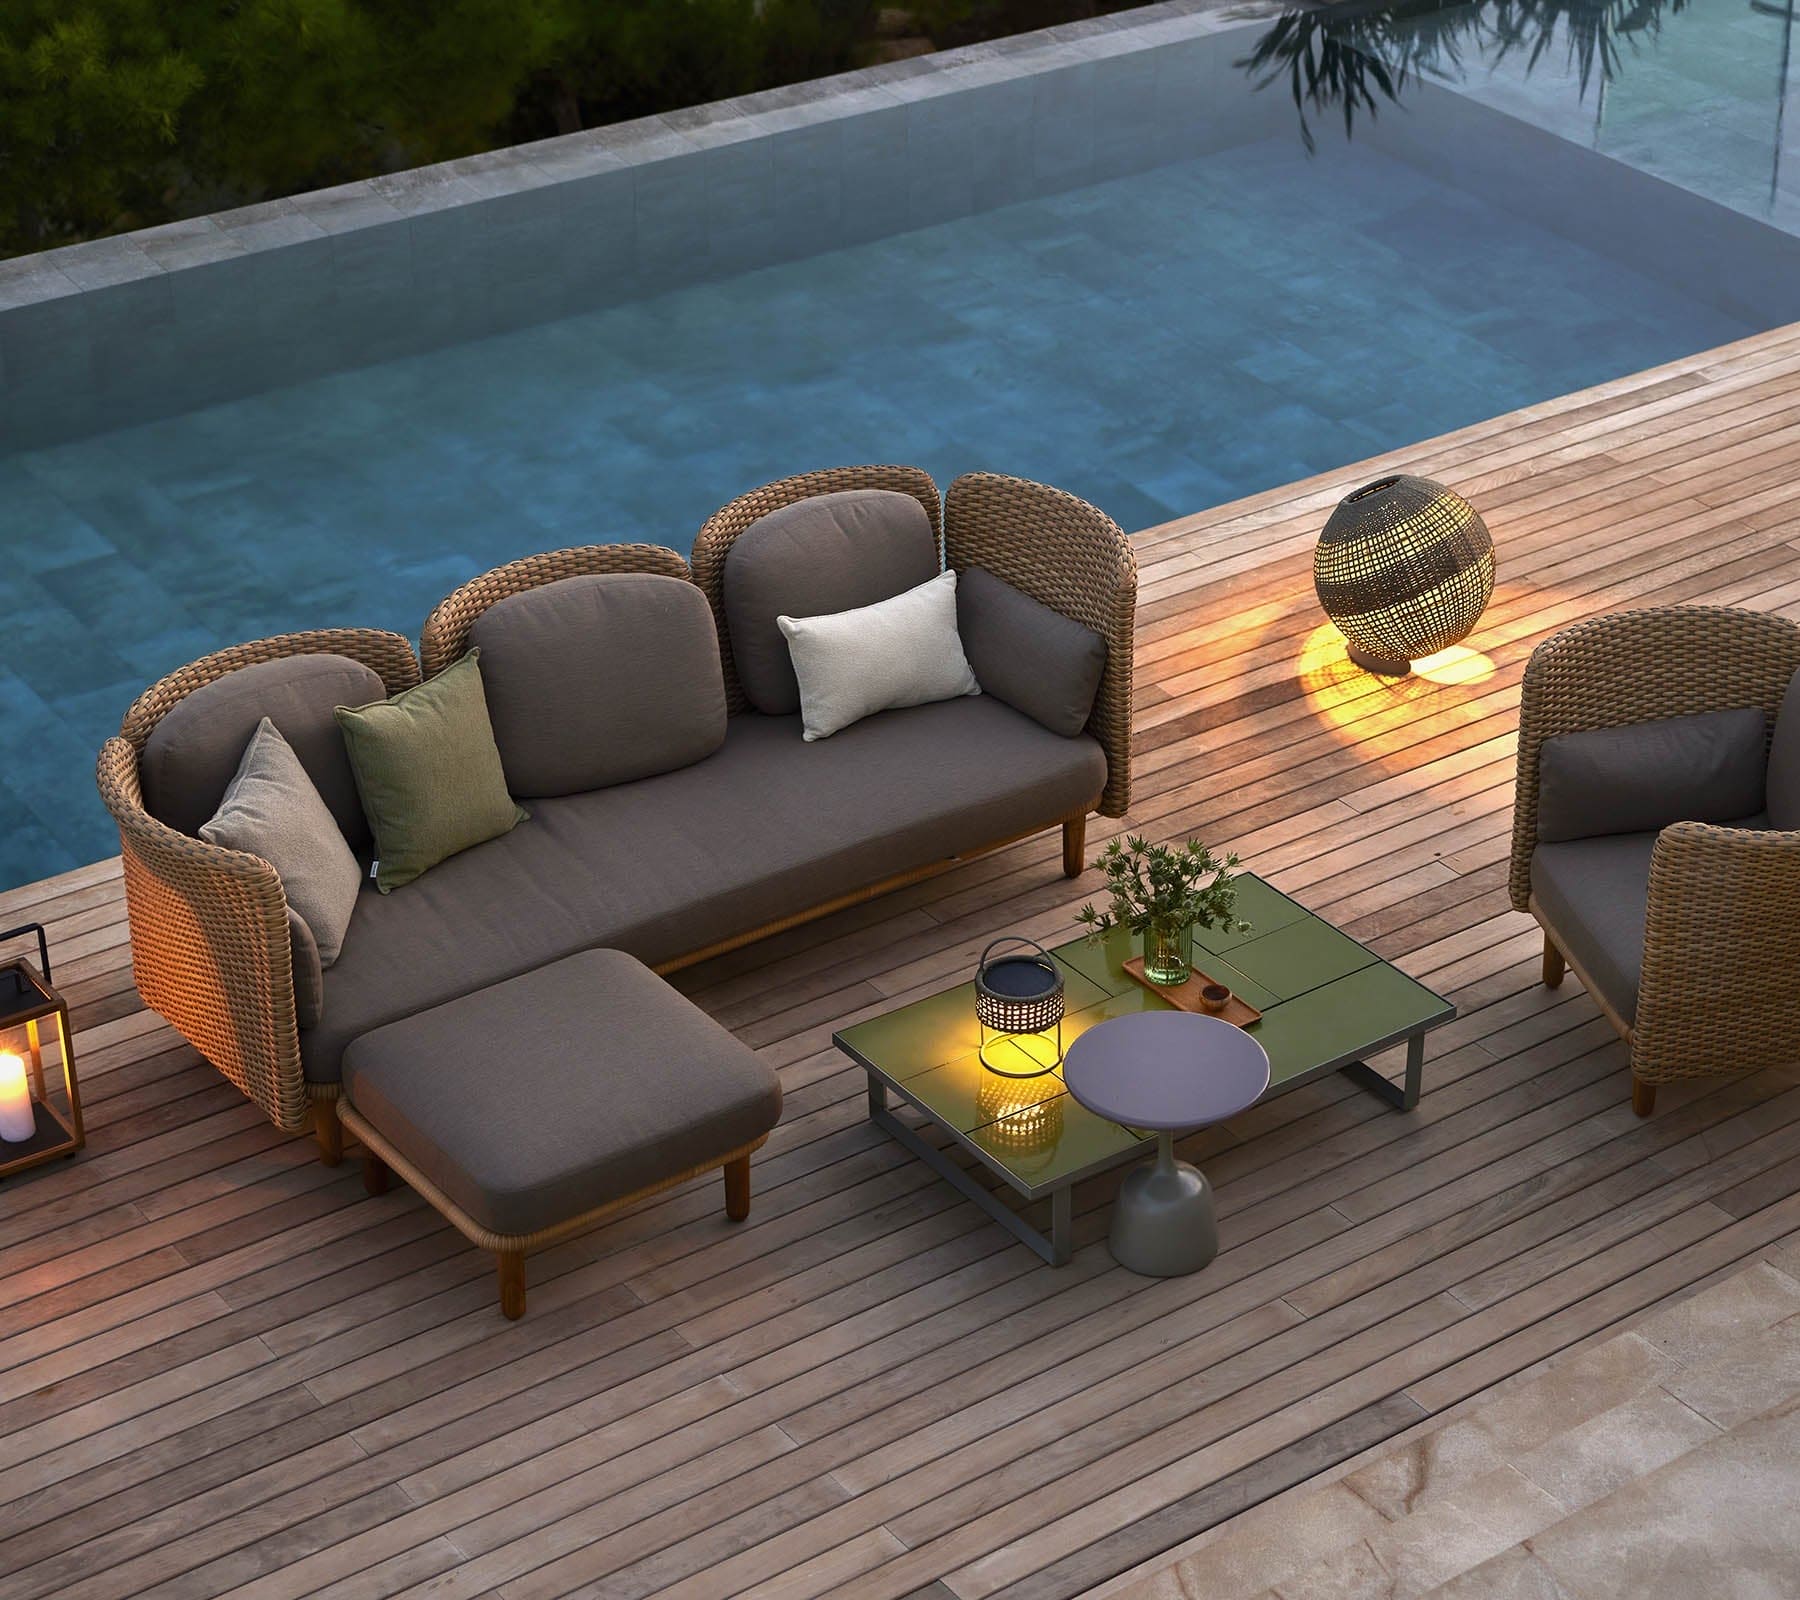 Arch 3-Seater Outdoor Sofa | Low Arm/Back